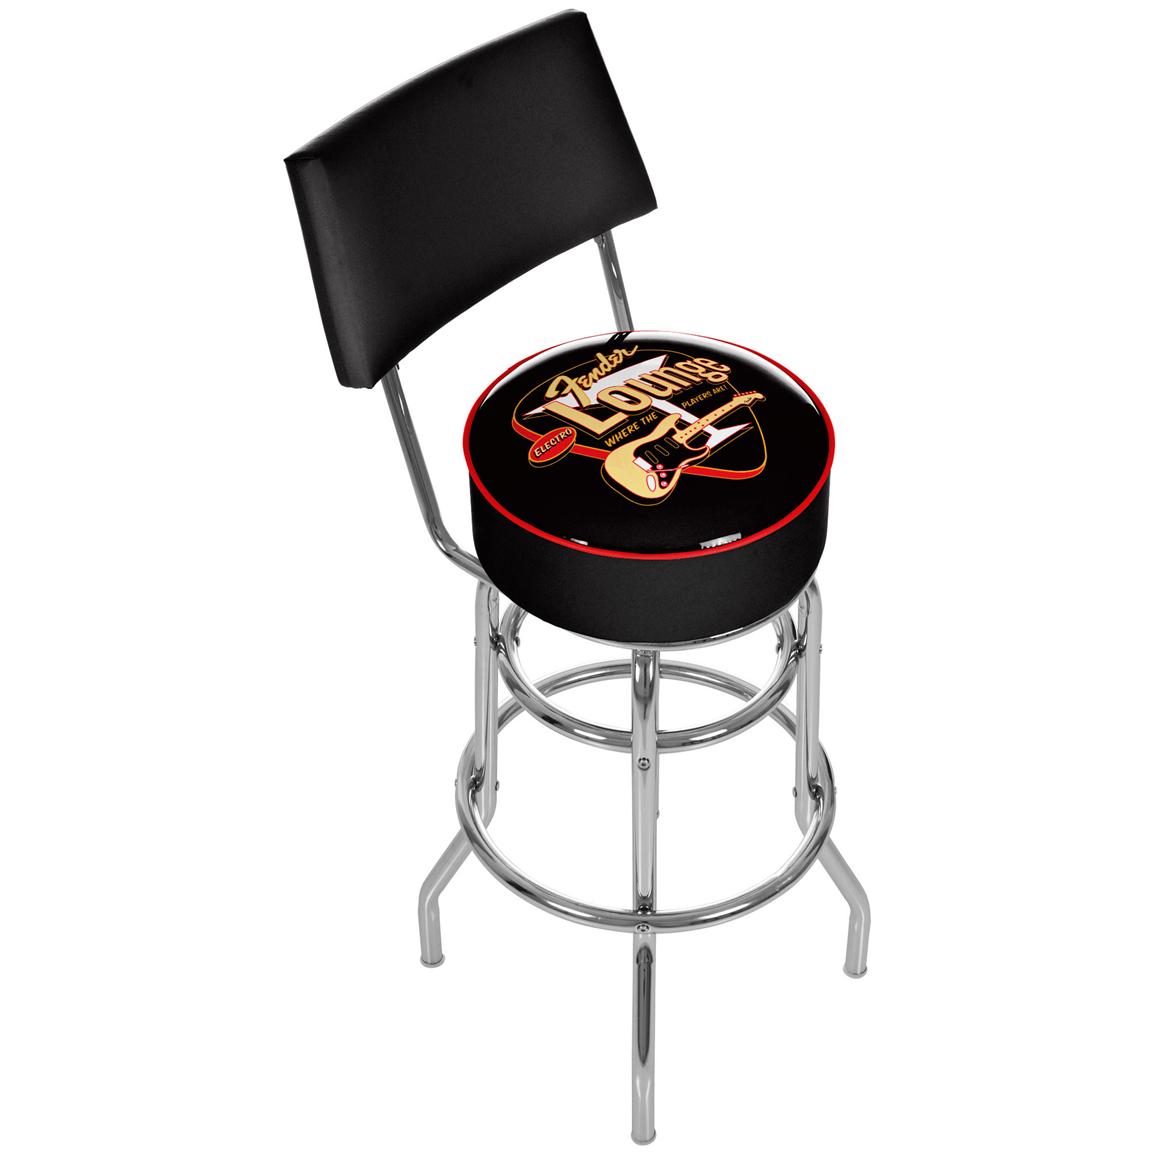 Fender® Padded Bar Stool with Backrest - 300063, at Sportsman's Guide